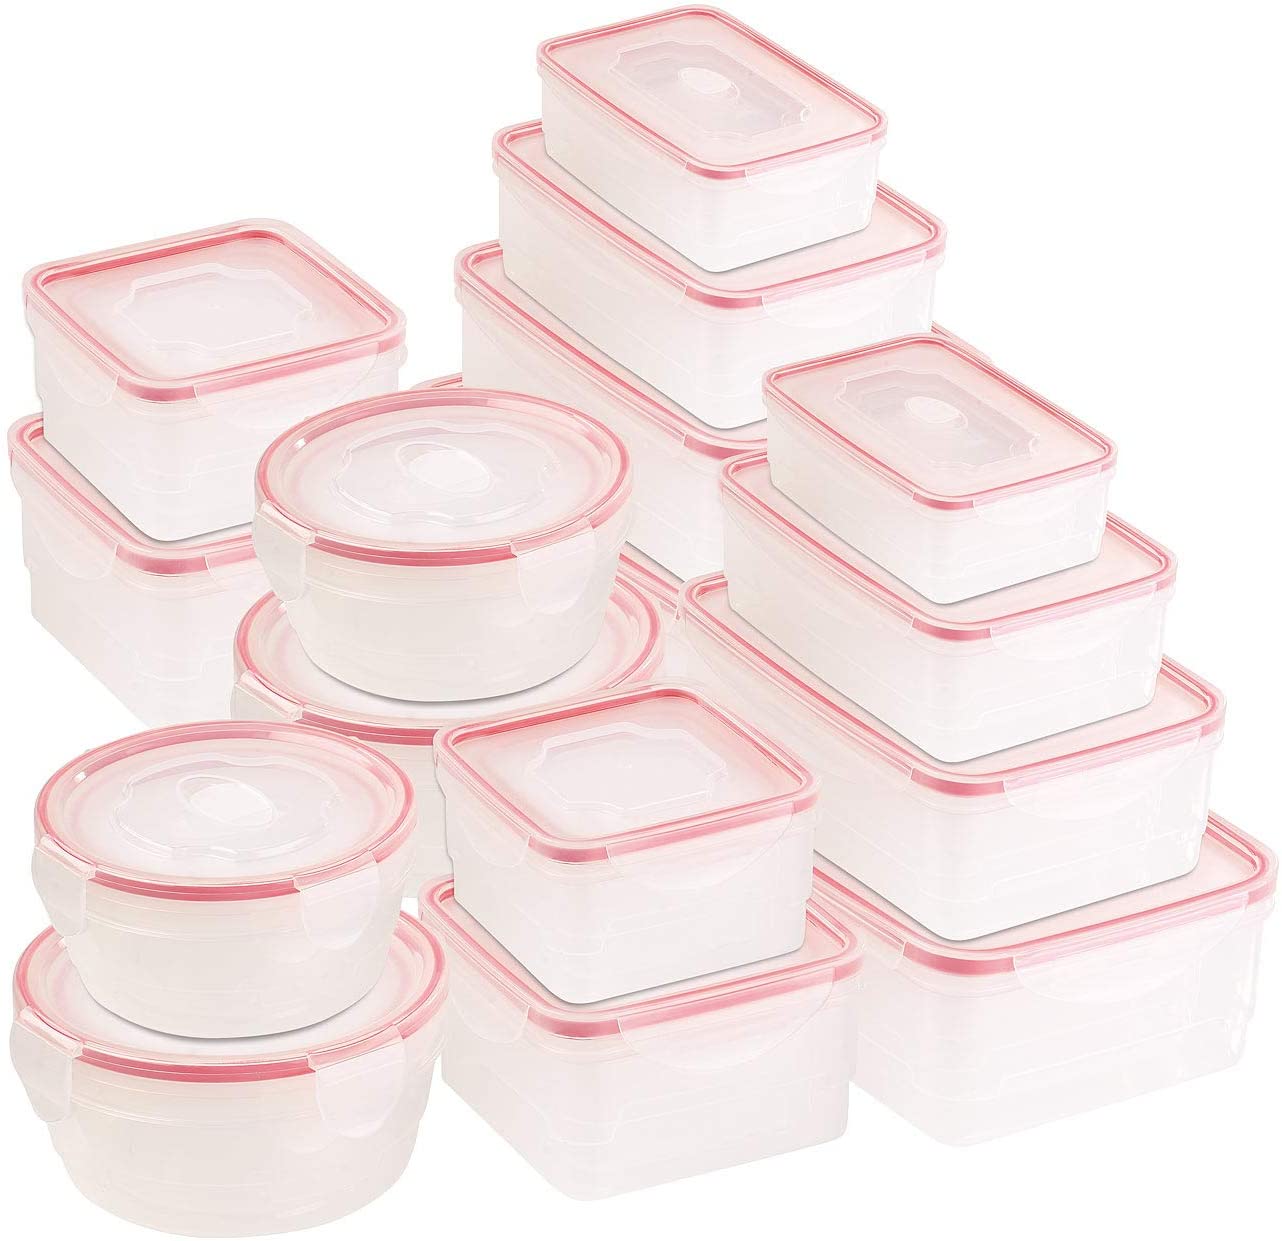 Rosenstein & Söhne Storage Containers: Set of 2, 8 Food Storage Containers with Clip Lid, BPA Free (Storage Container)